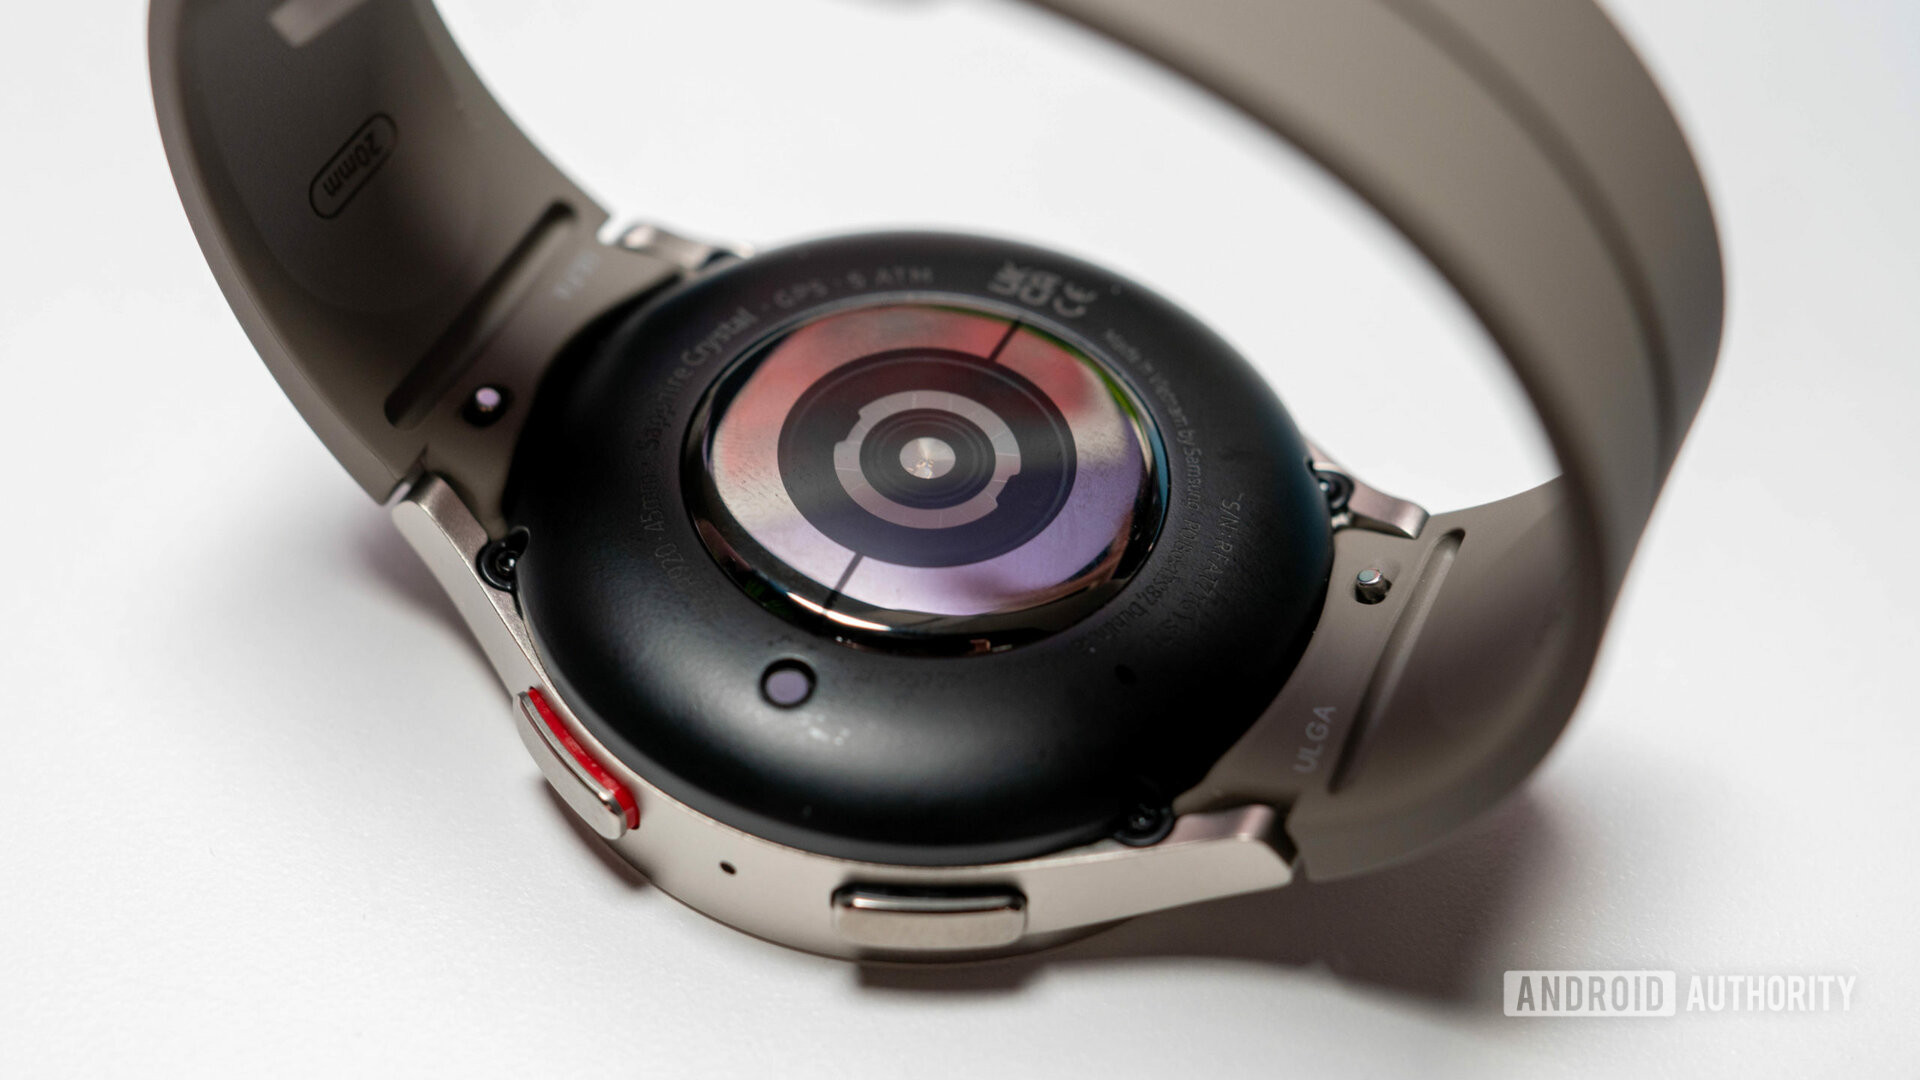 Samsung Galaxy Watch 5 Pro in silver color with fluoroelastomer strap showing rear sensor and buttons